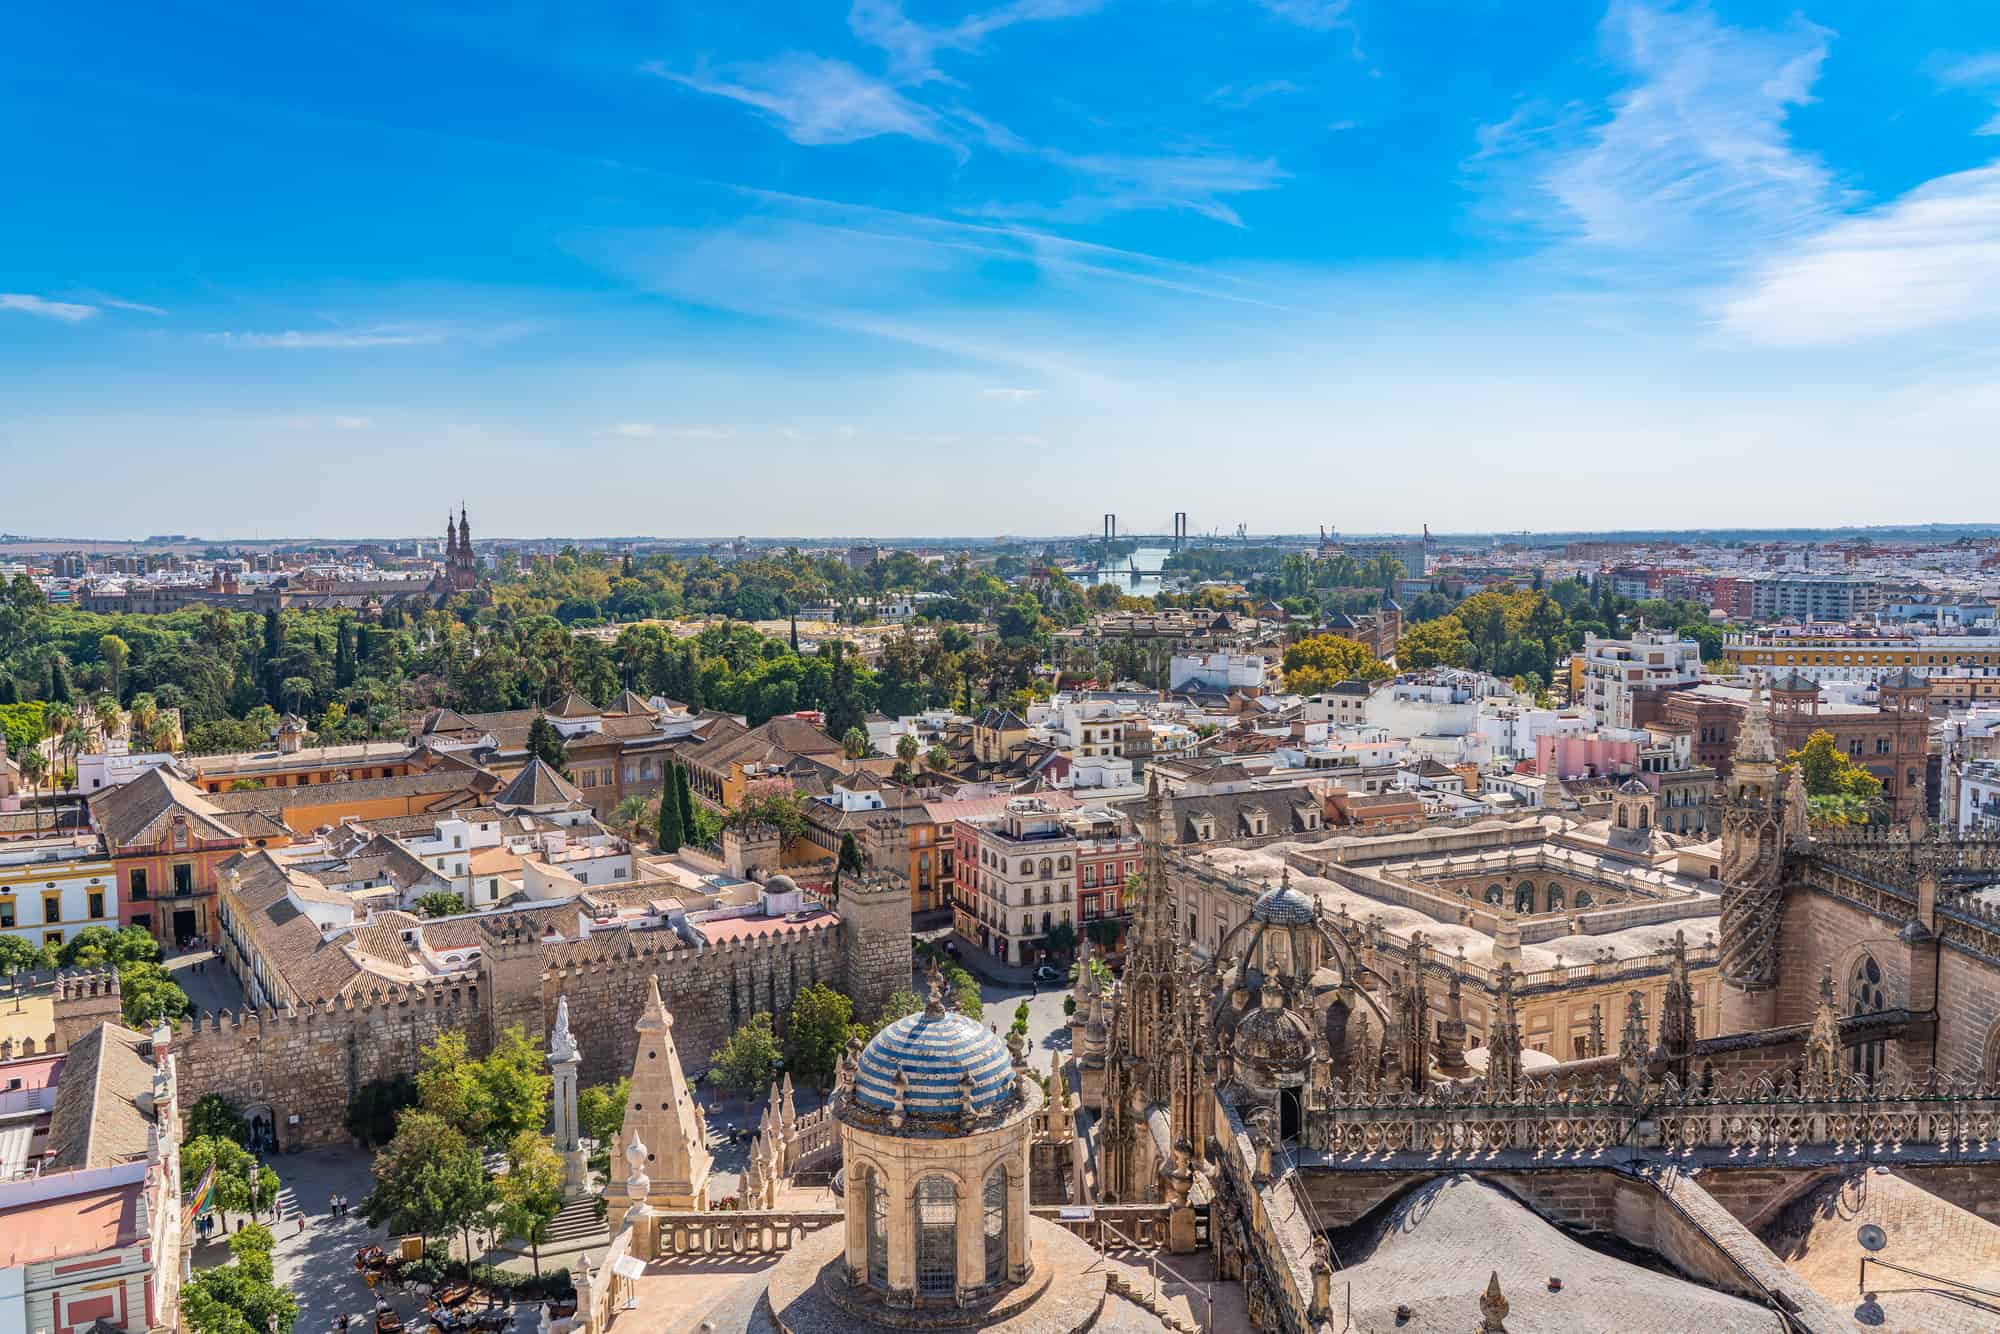 City skyline of Sevilla aerial view from the top of Cathedral of Saint Mary of the See